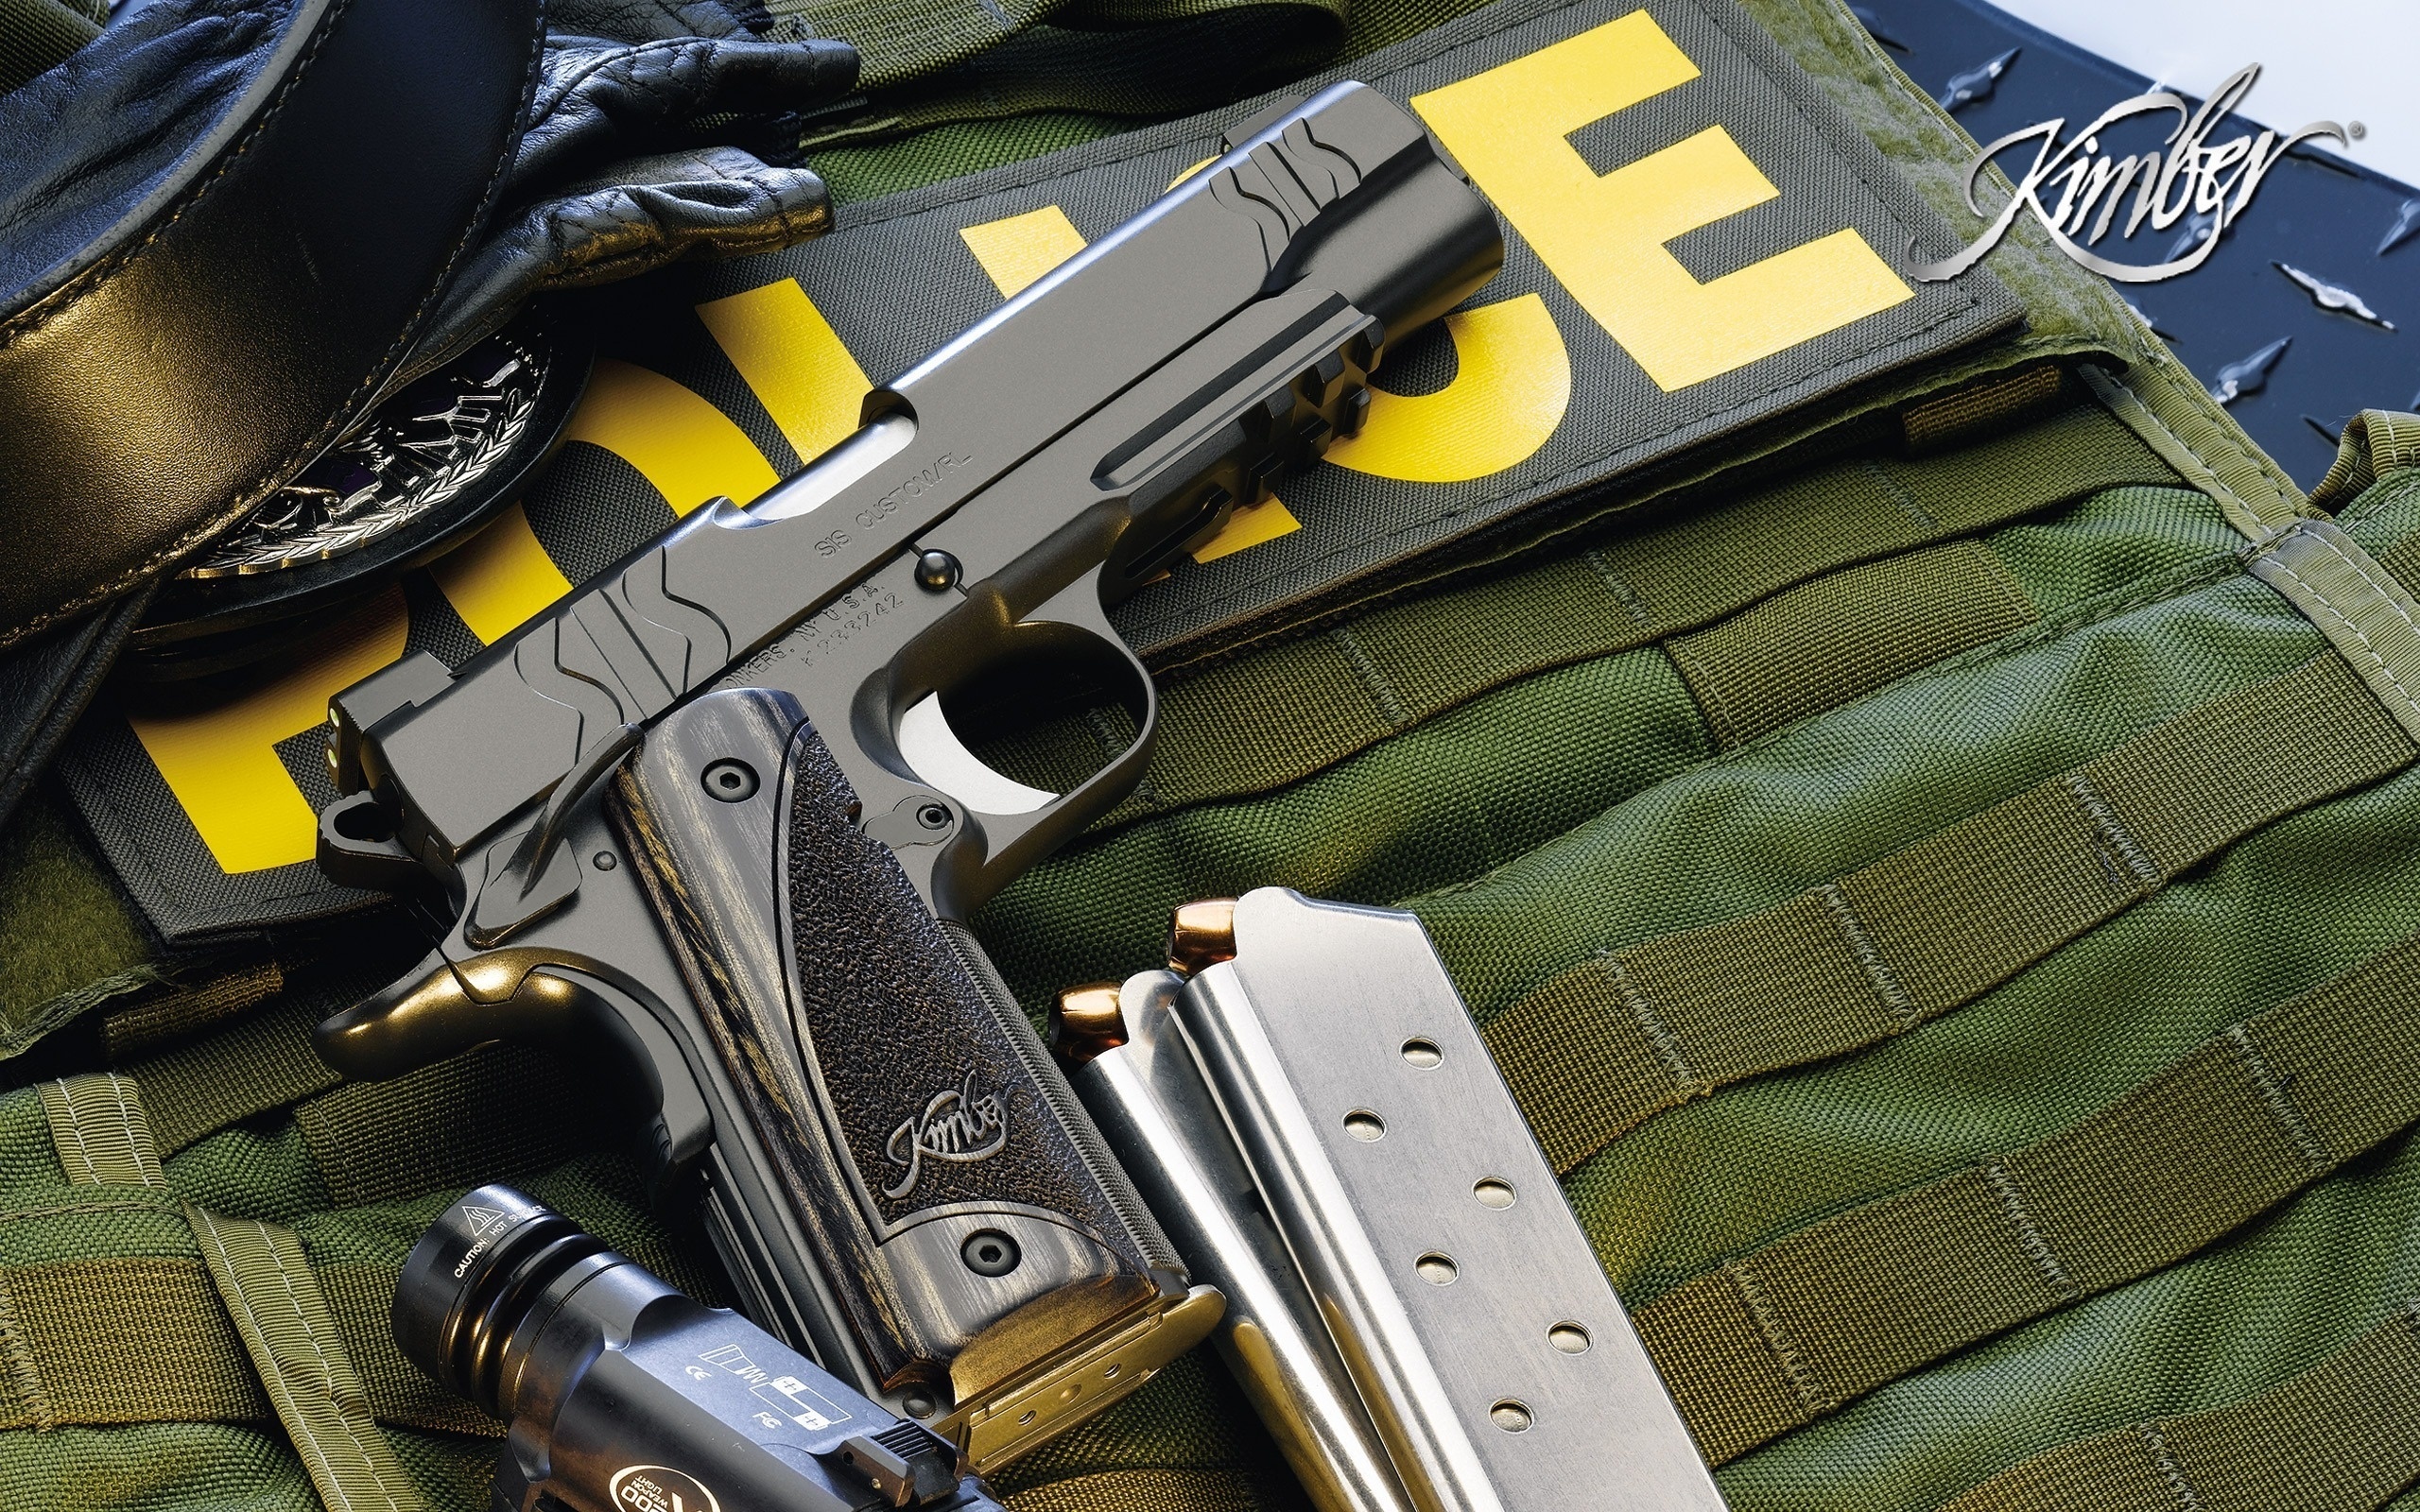 Weapons, Shops, Kimber, Police, Flashlight, The Gun - Up Police Wallpaper Download - HD Wallpaper 